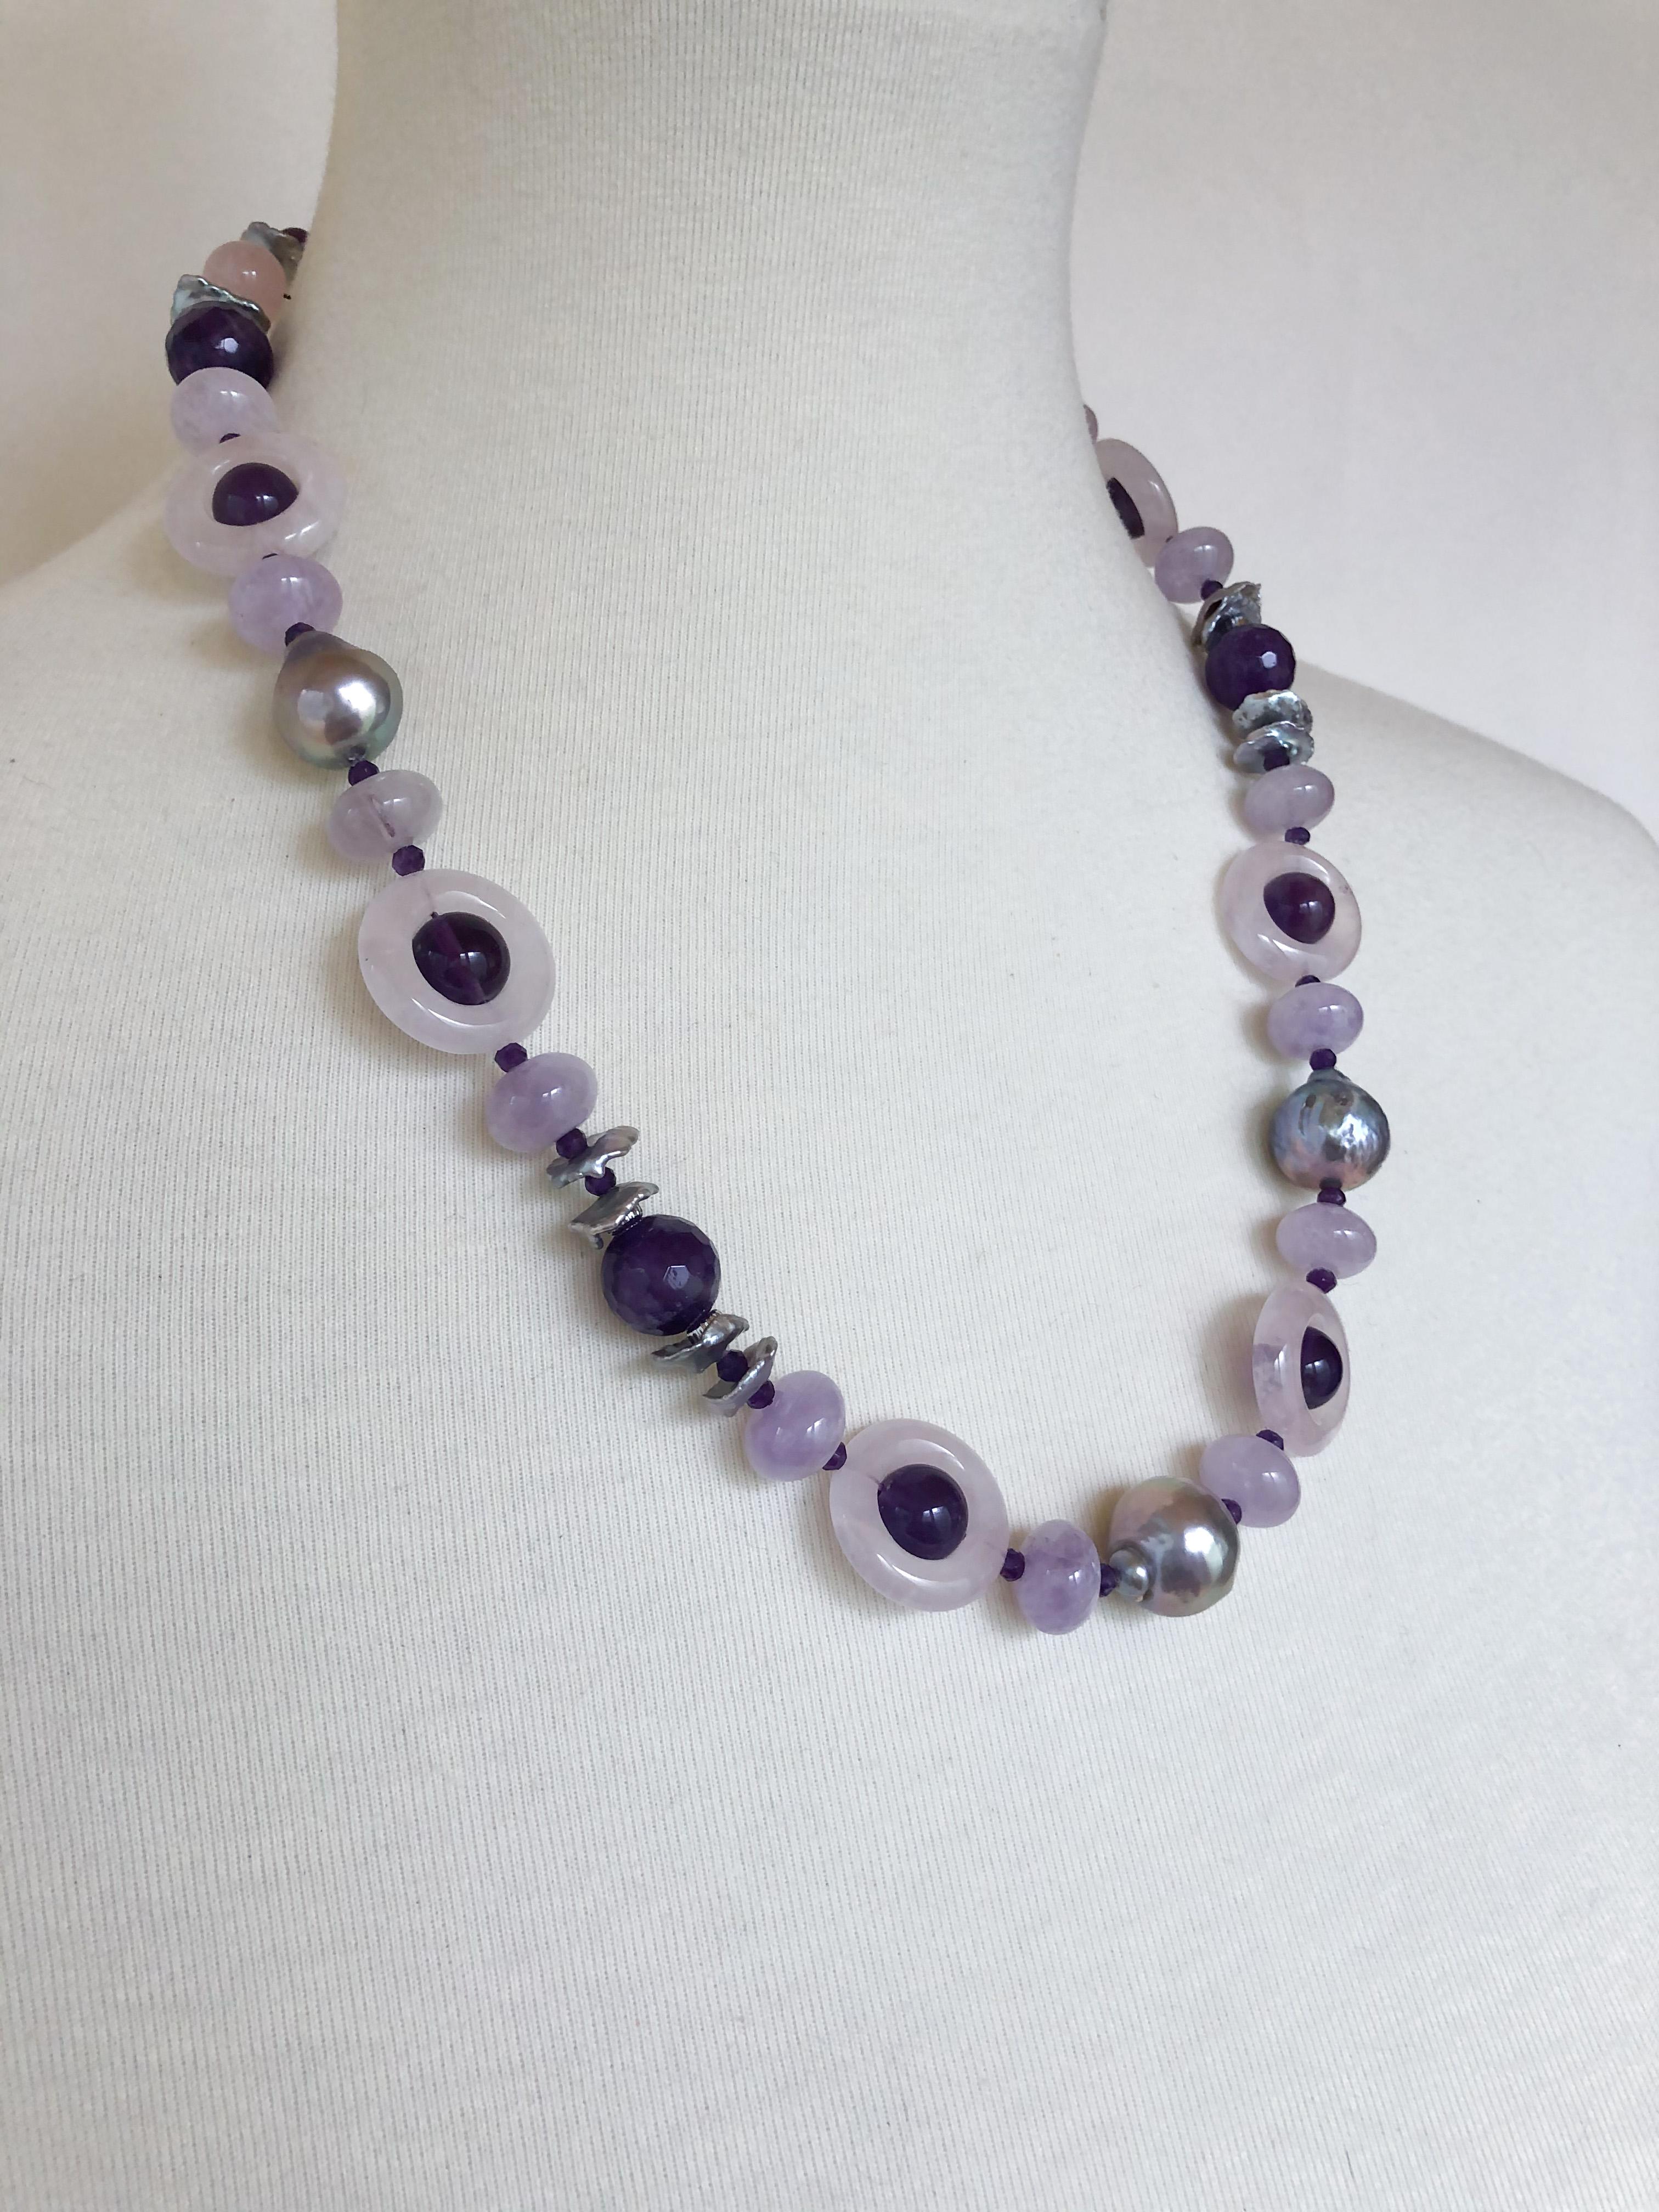 Beautiful stone necklace by Marina J. This lovely piece is made using multi shaped faceted Amethysts and Rose Quartz all adorned by 14k White Gold plated Silver Vermeil findings & Freshwater Grey Pearls which display a vivid sheen and iridescence.